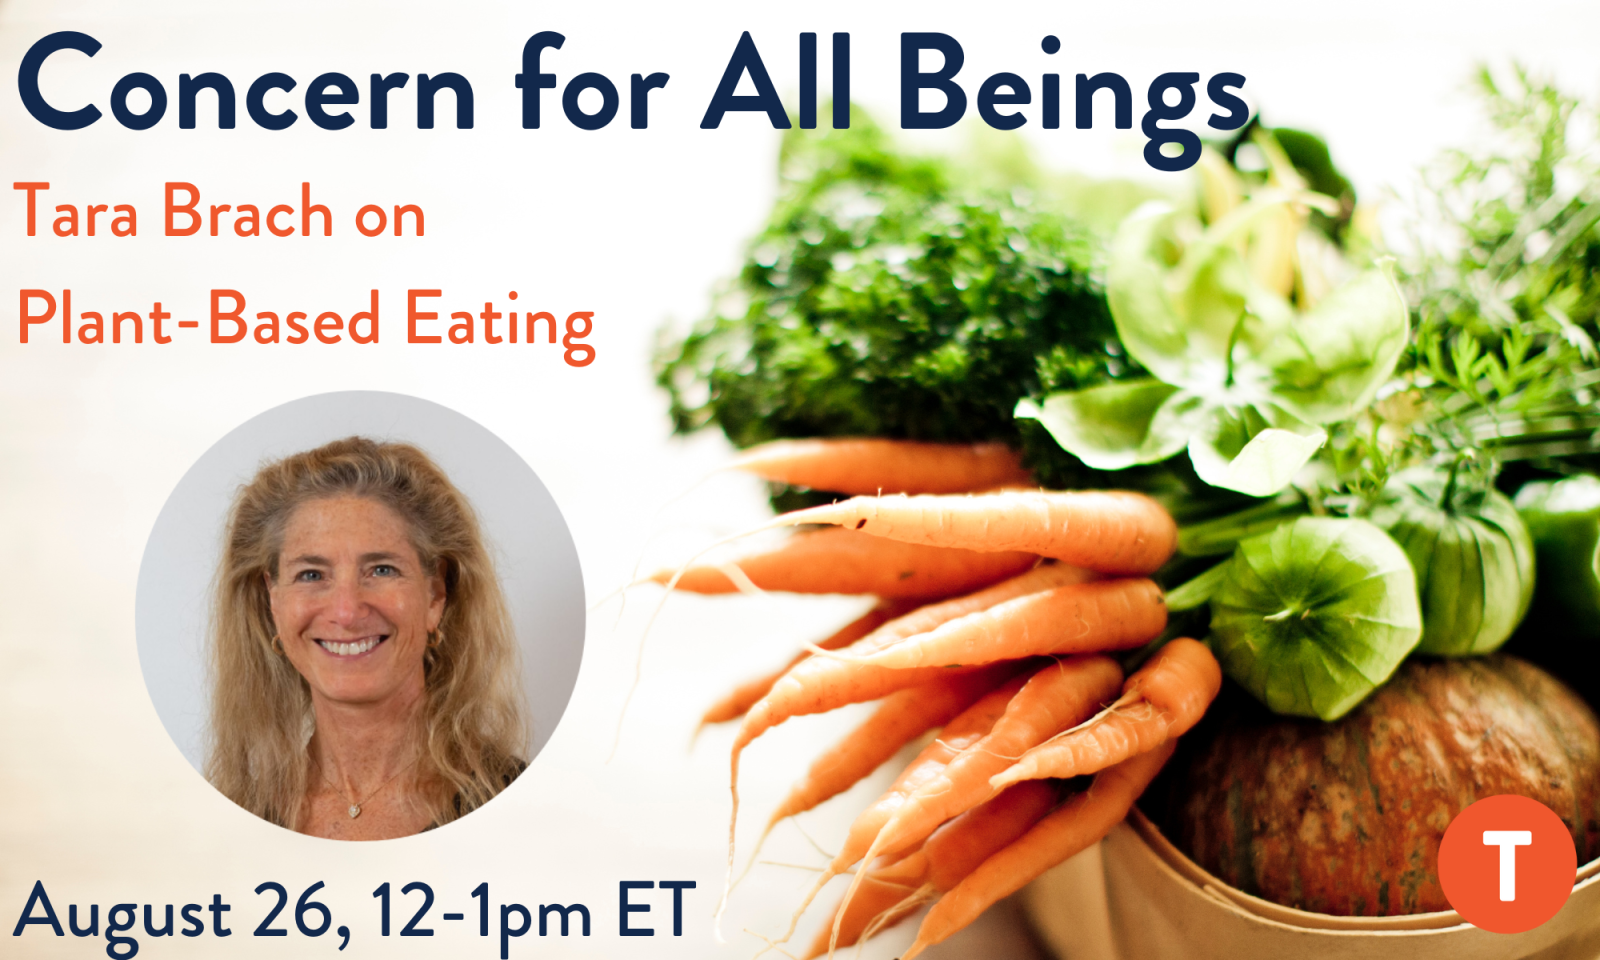 Concern for All Beings: An Event with Tara Brach